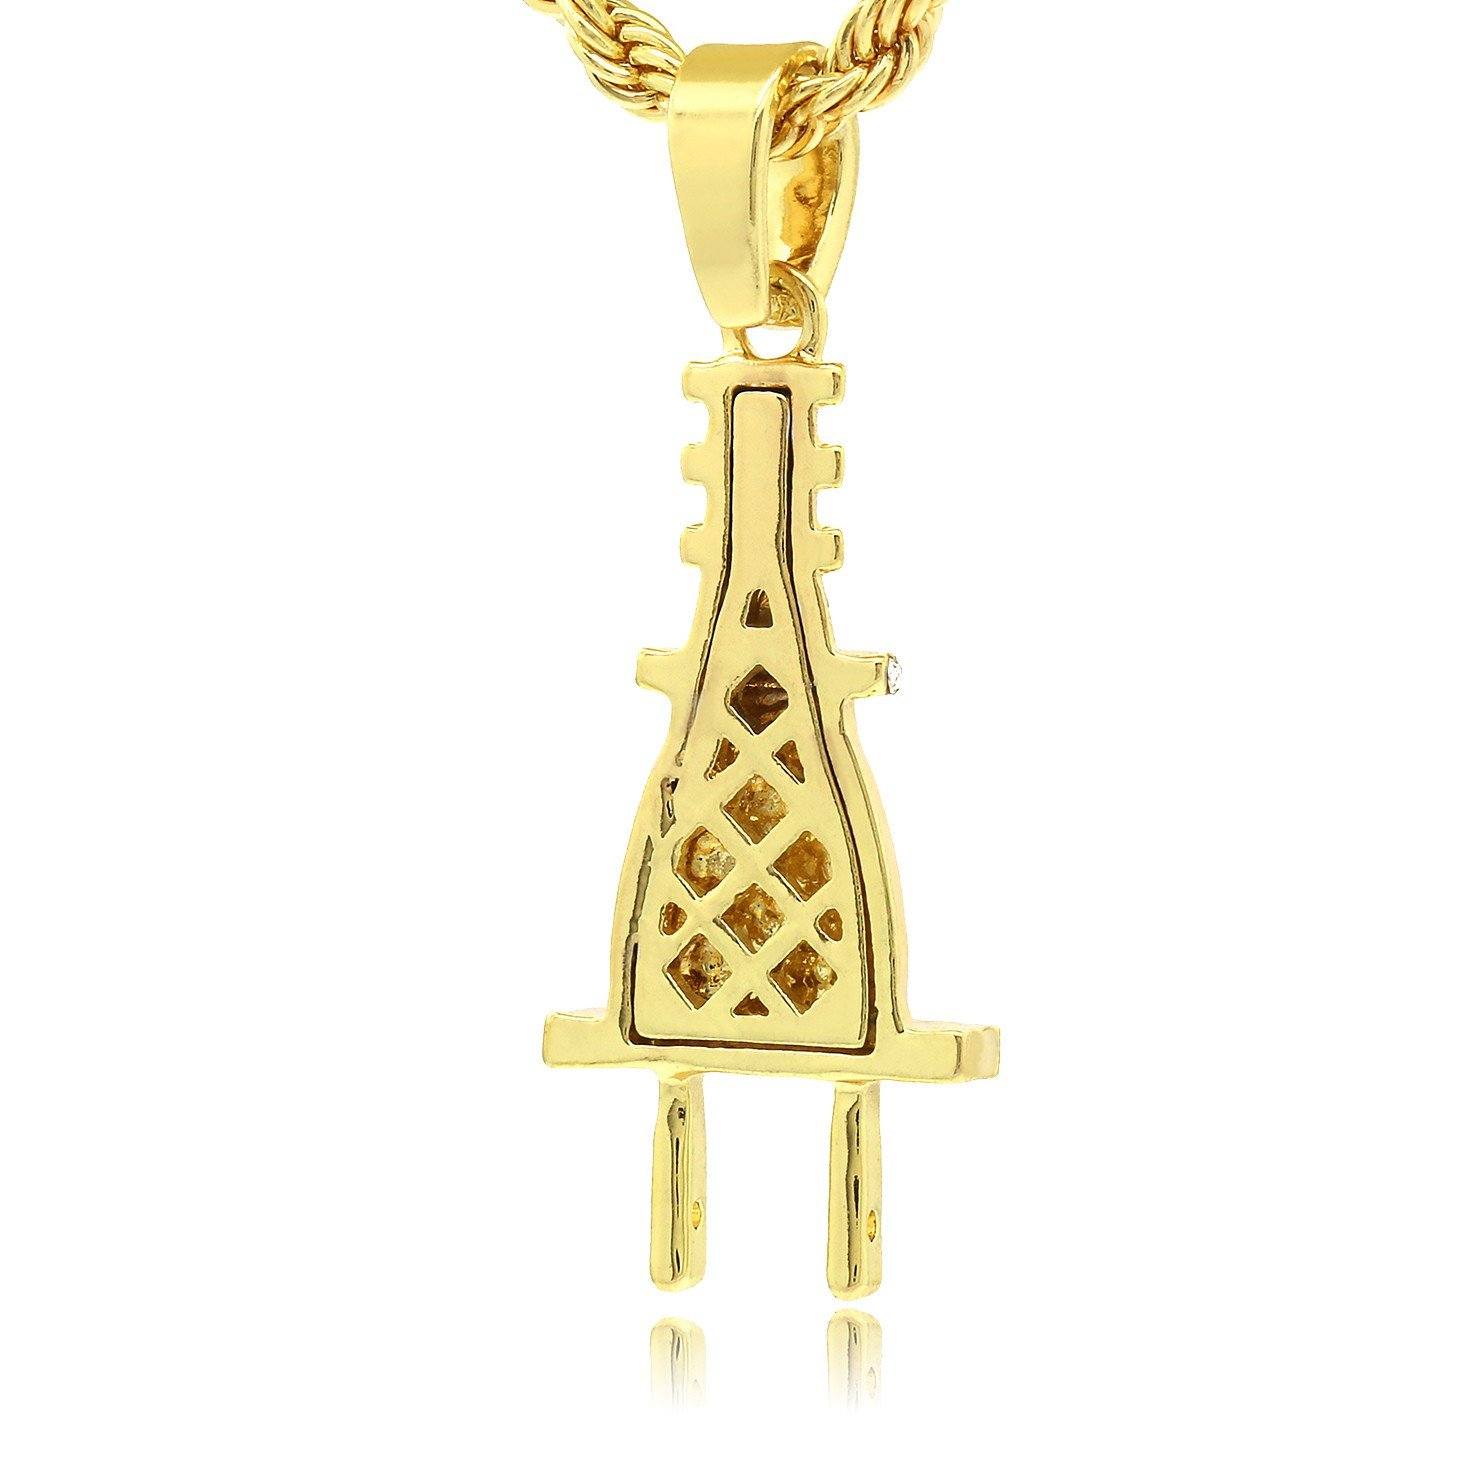 CZ FLAT PLUG PENDANT3 WITH GOLD ROPE CHAIN